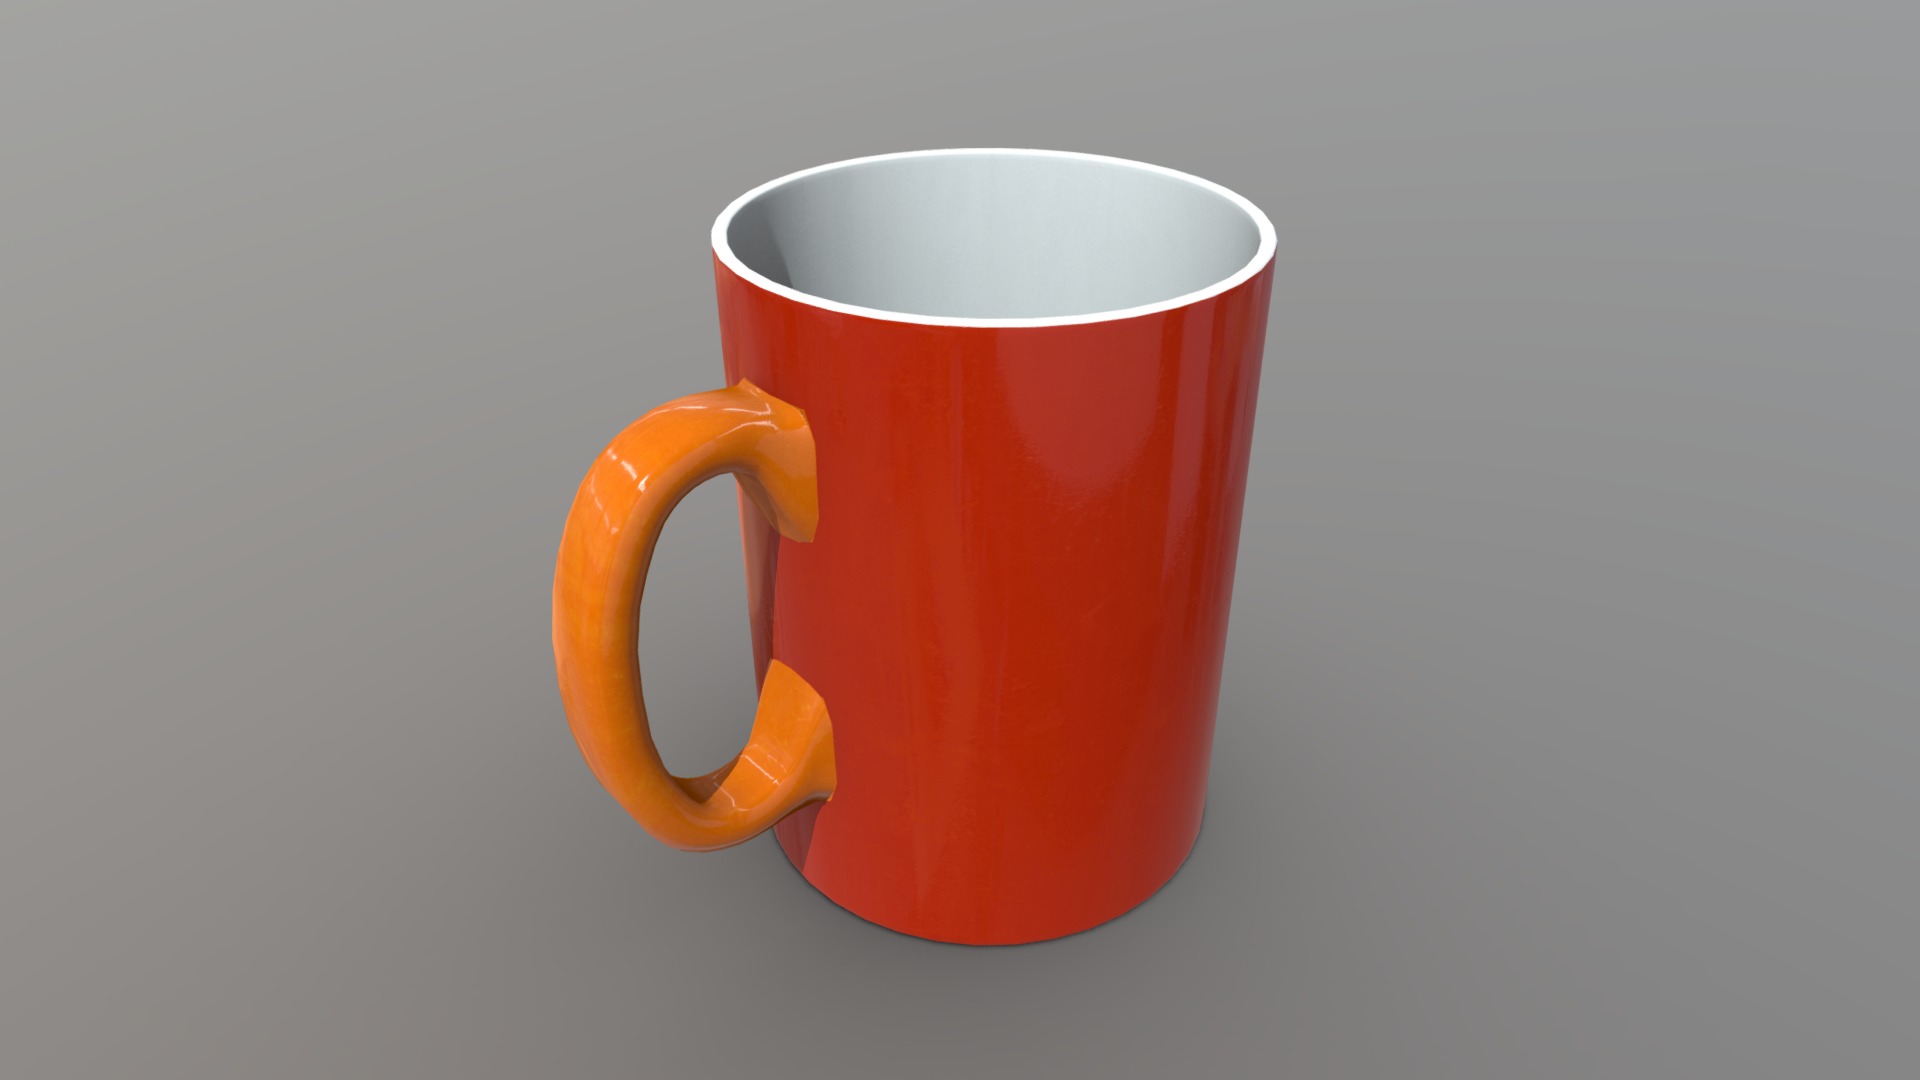 3D model Mug 2 - This is a 3D model of the Mug 2. The 3D model is about a red and white coffee cup.